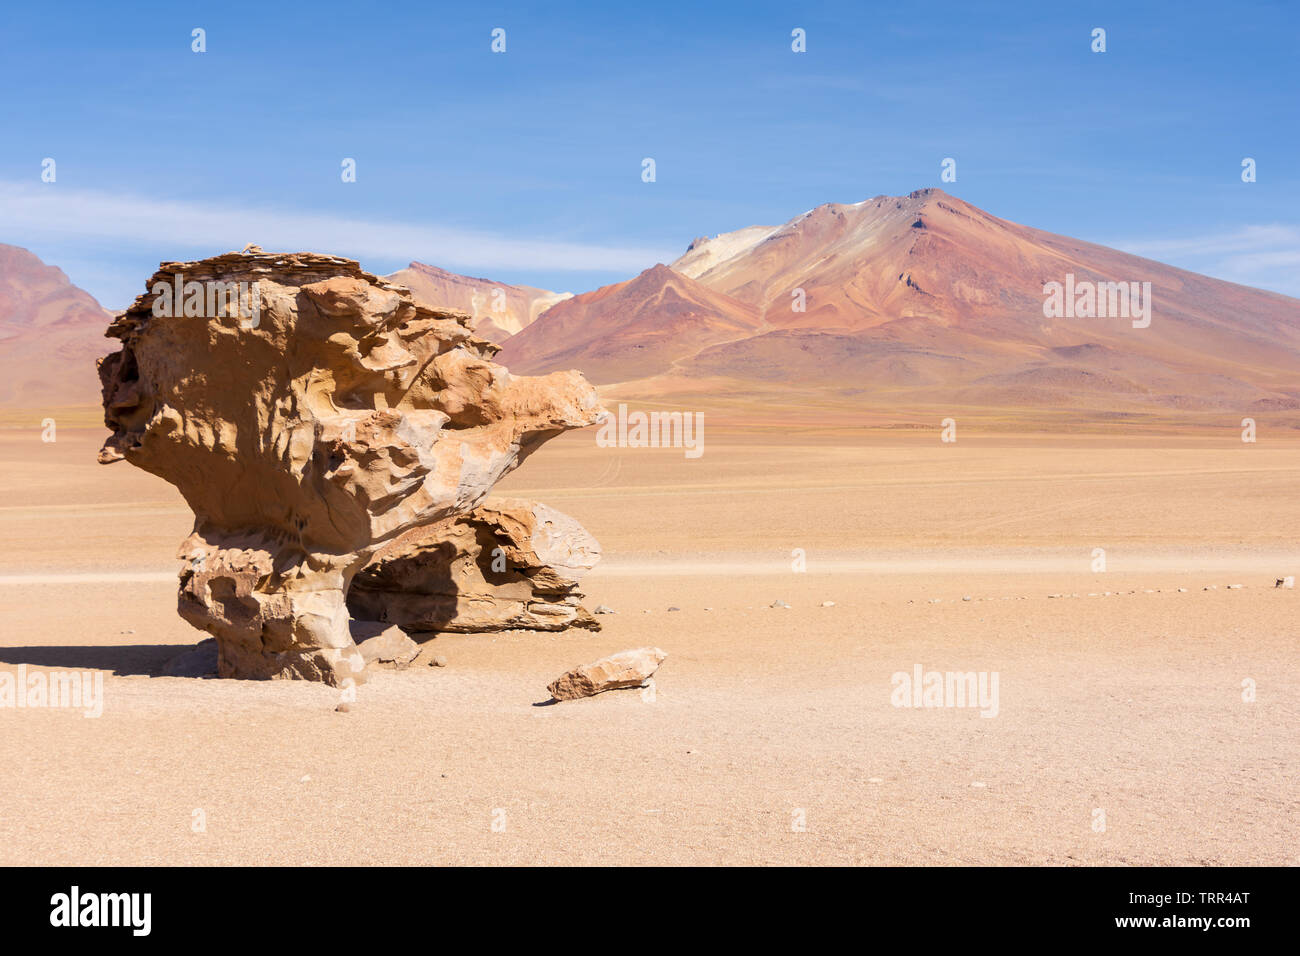 A side view of the Stone Tree (Arbol de Piedra), an isolated rock formation in the Siloli Desert, part of the Altiplano region of Bolivia. Stock Photo